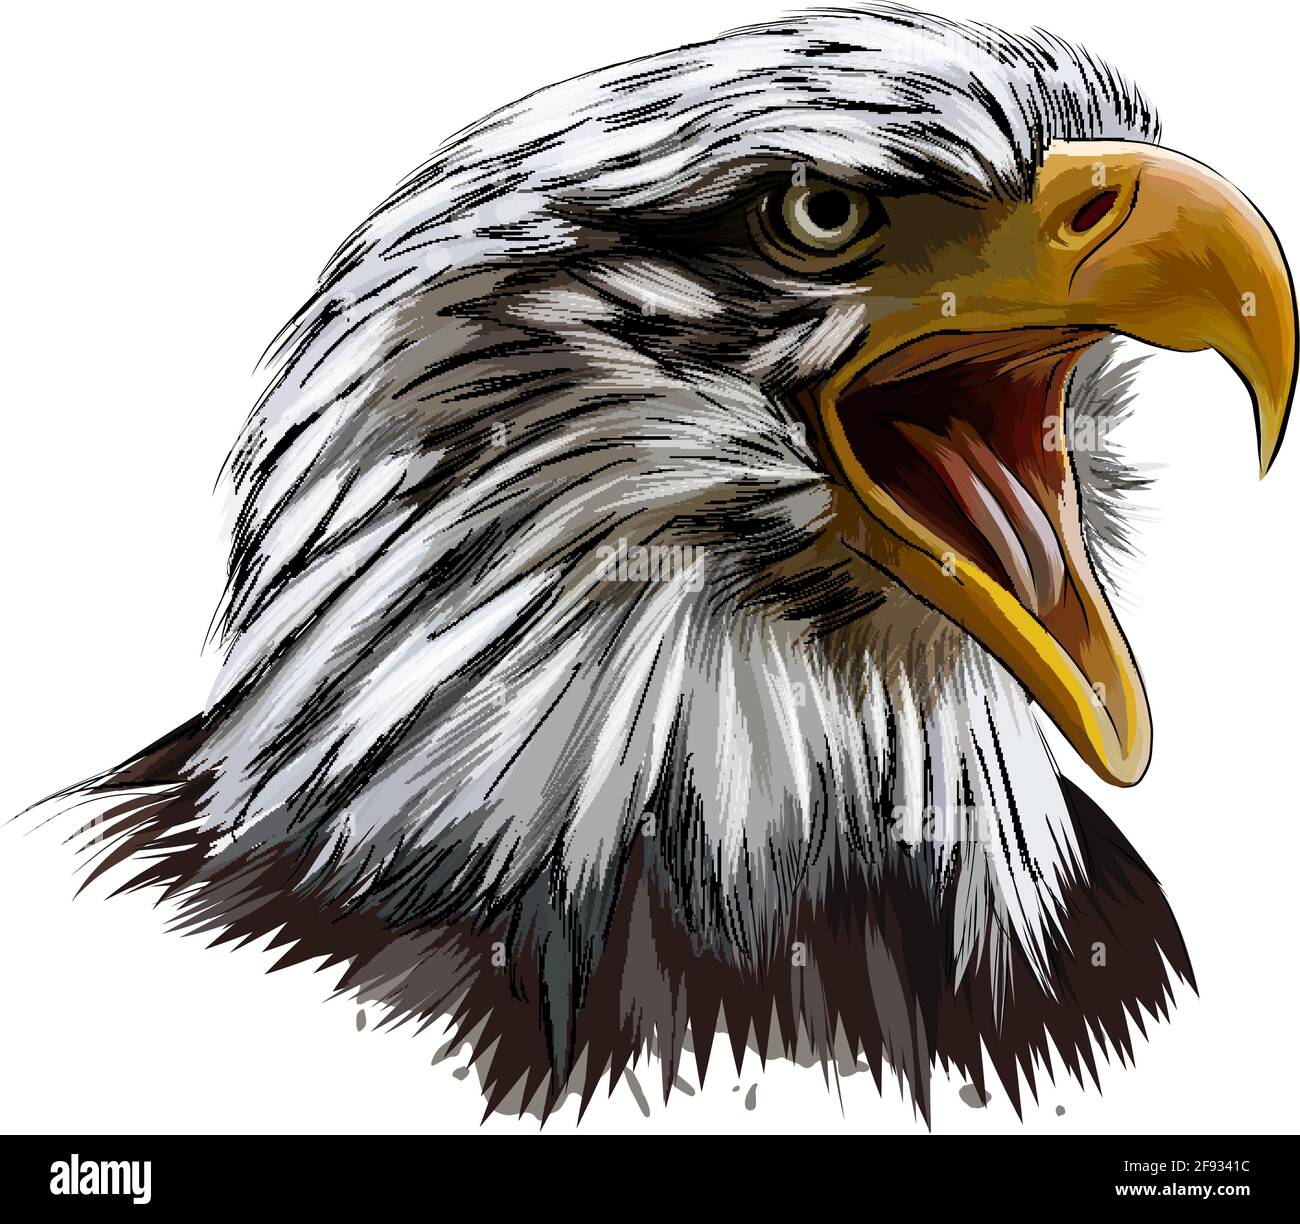 Harshal Pandhe - ' The mighty eagle ' : Hyper-realistic digital painting